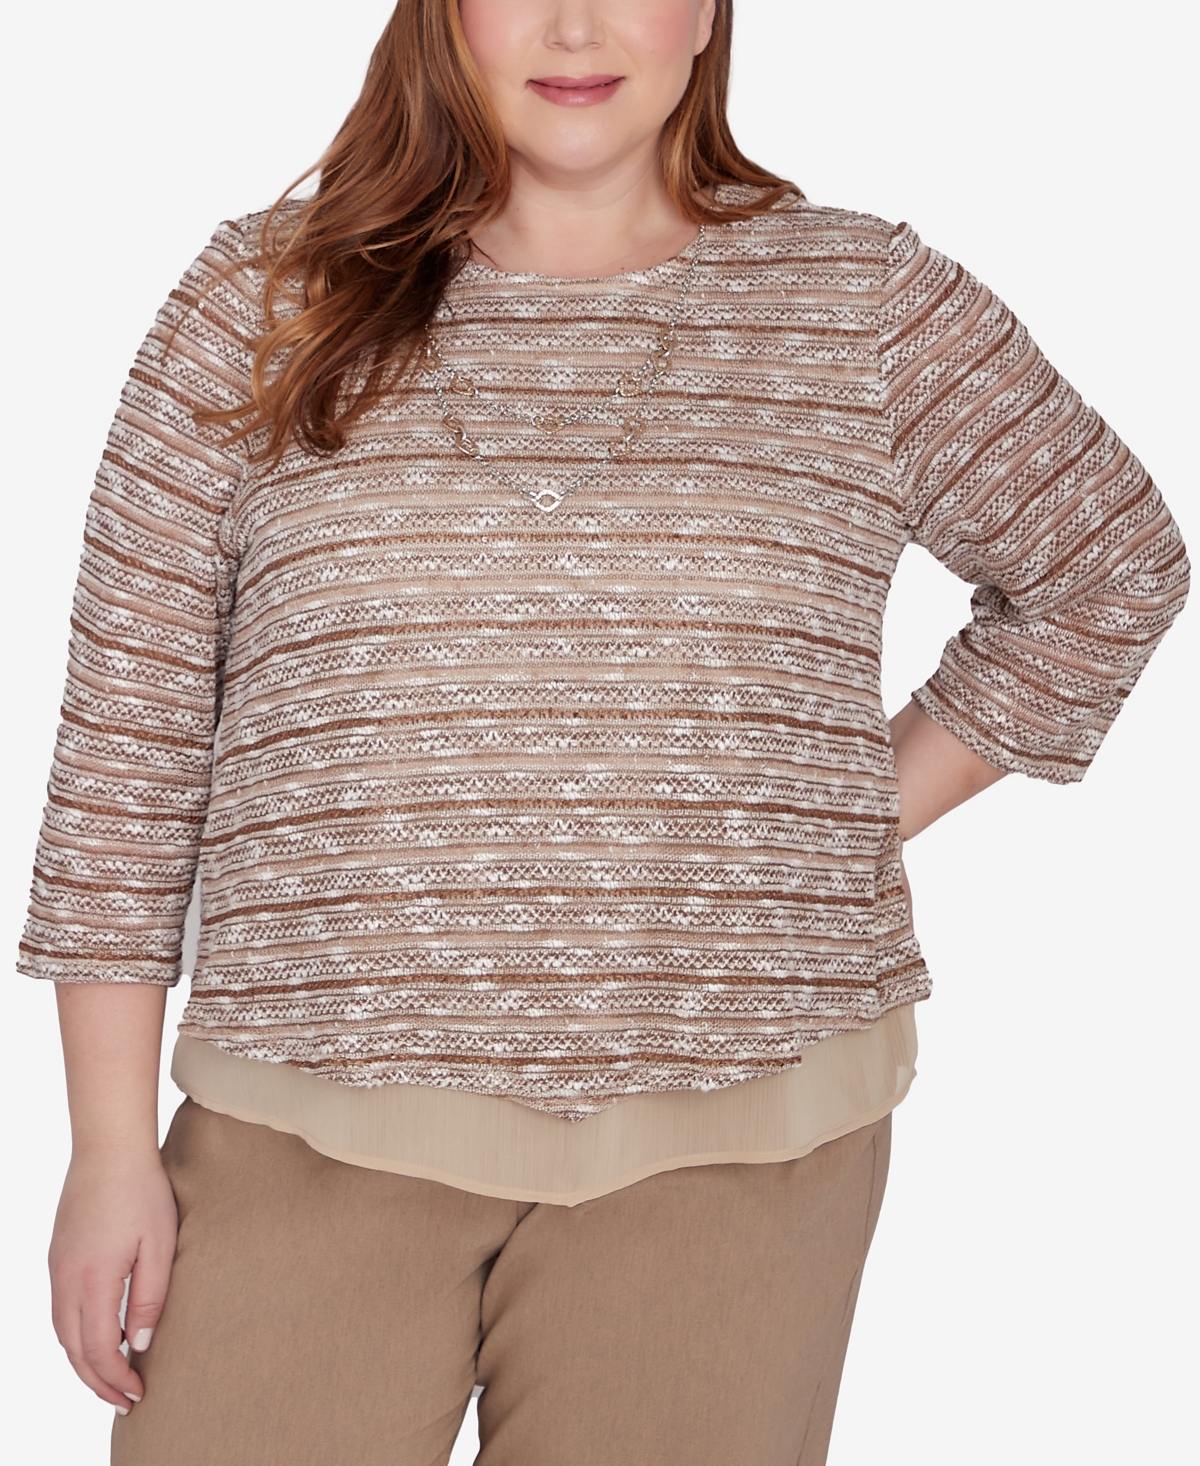 Plus Size Charm School Space Dye Textured Top with Necklace - Toast